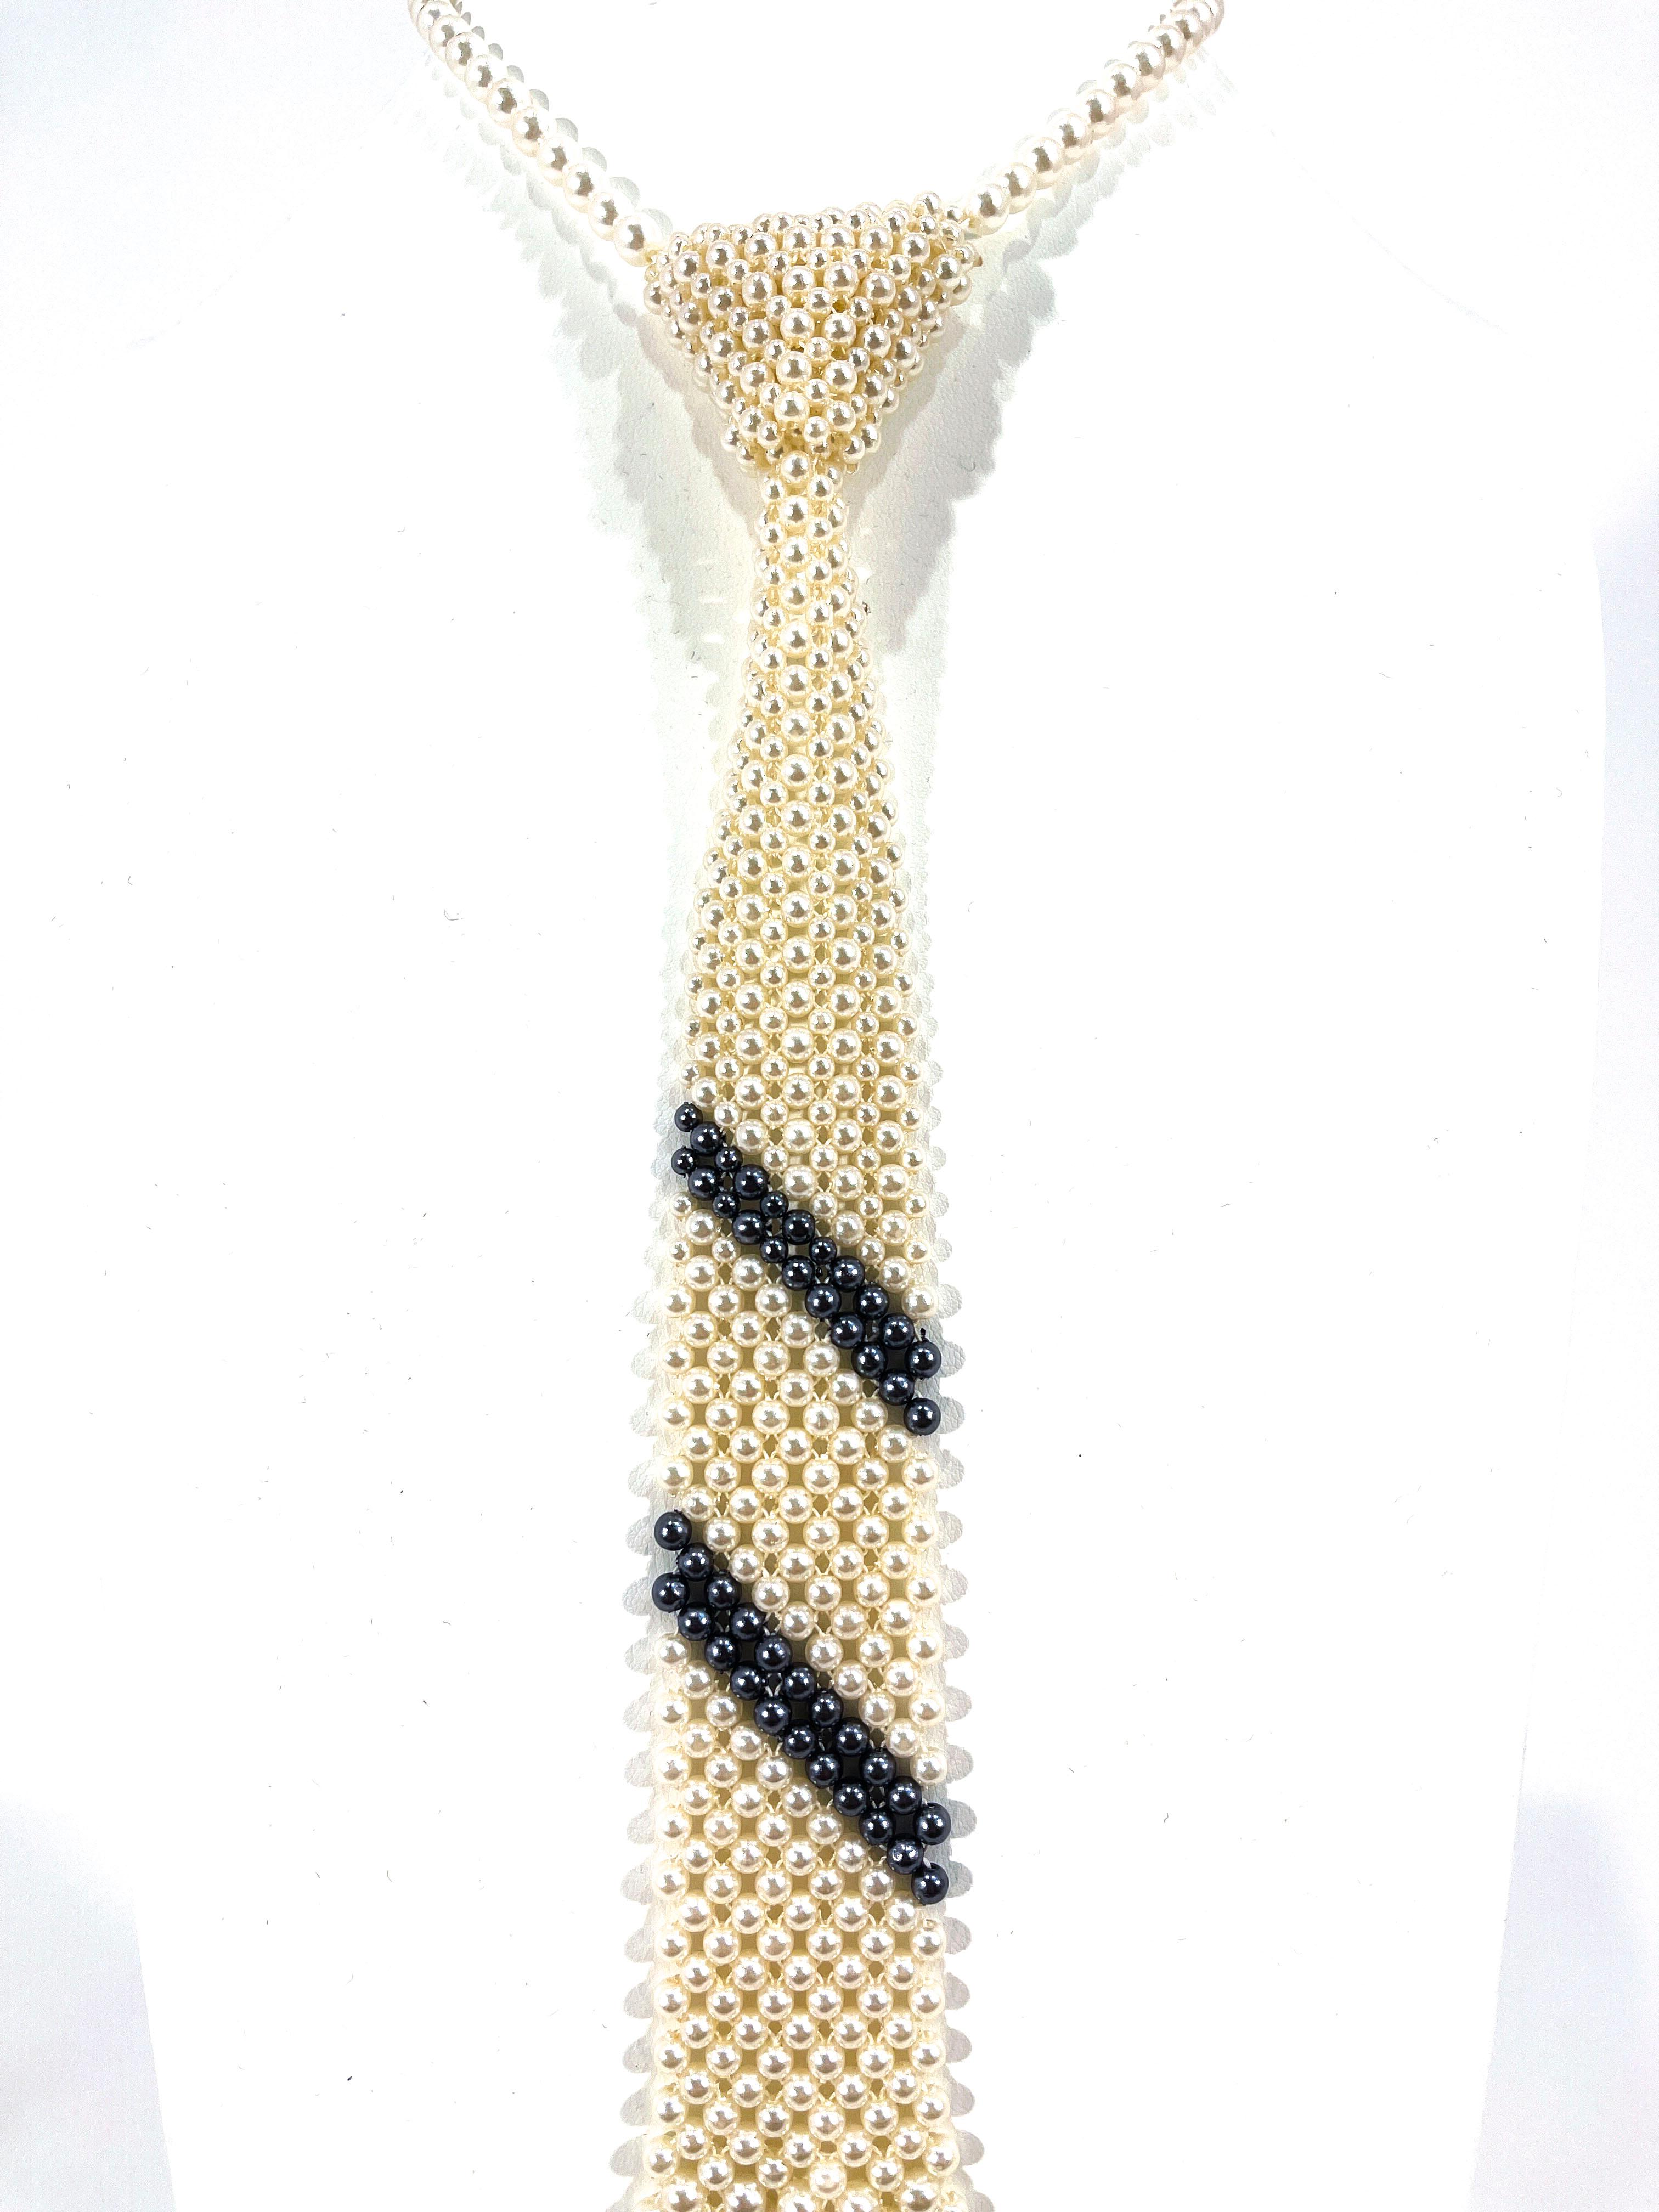 1960's glass pearl necktie necklace with graduating pearl size and two stripes of gray pearls in the center.  The actual length of the necklace that is adjustable around the neck can accommodate up to a 17 inch neck. The dimensions of the tie are